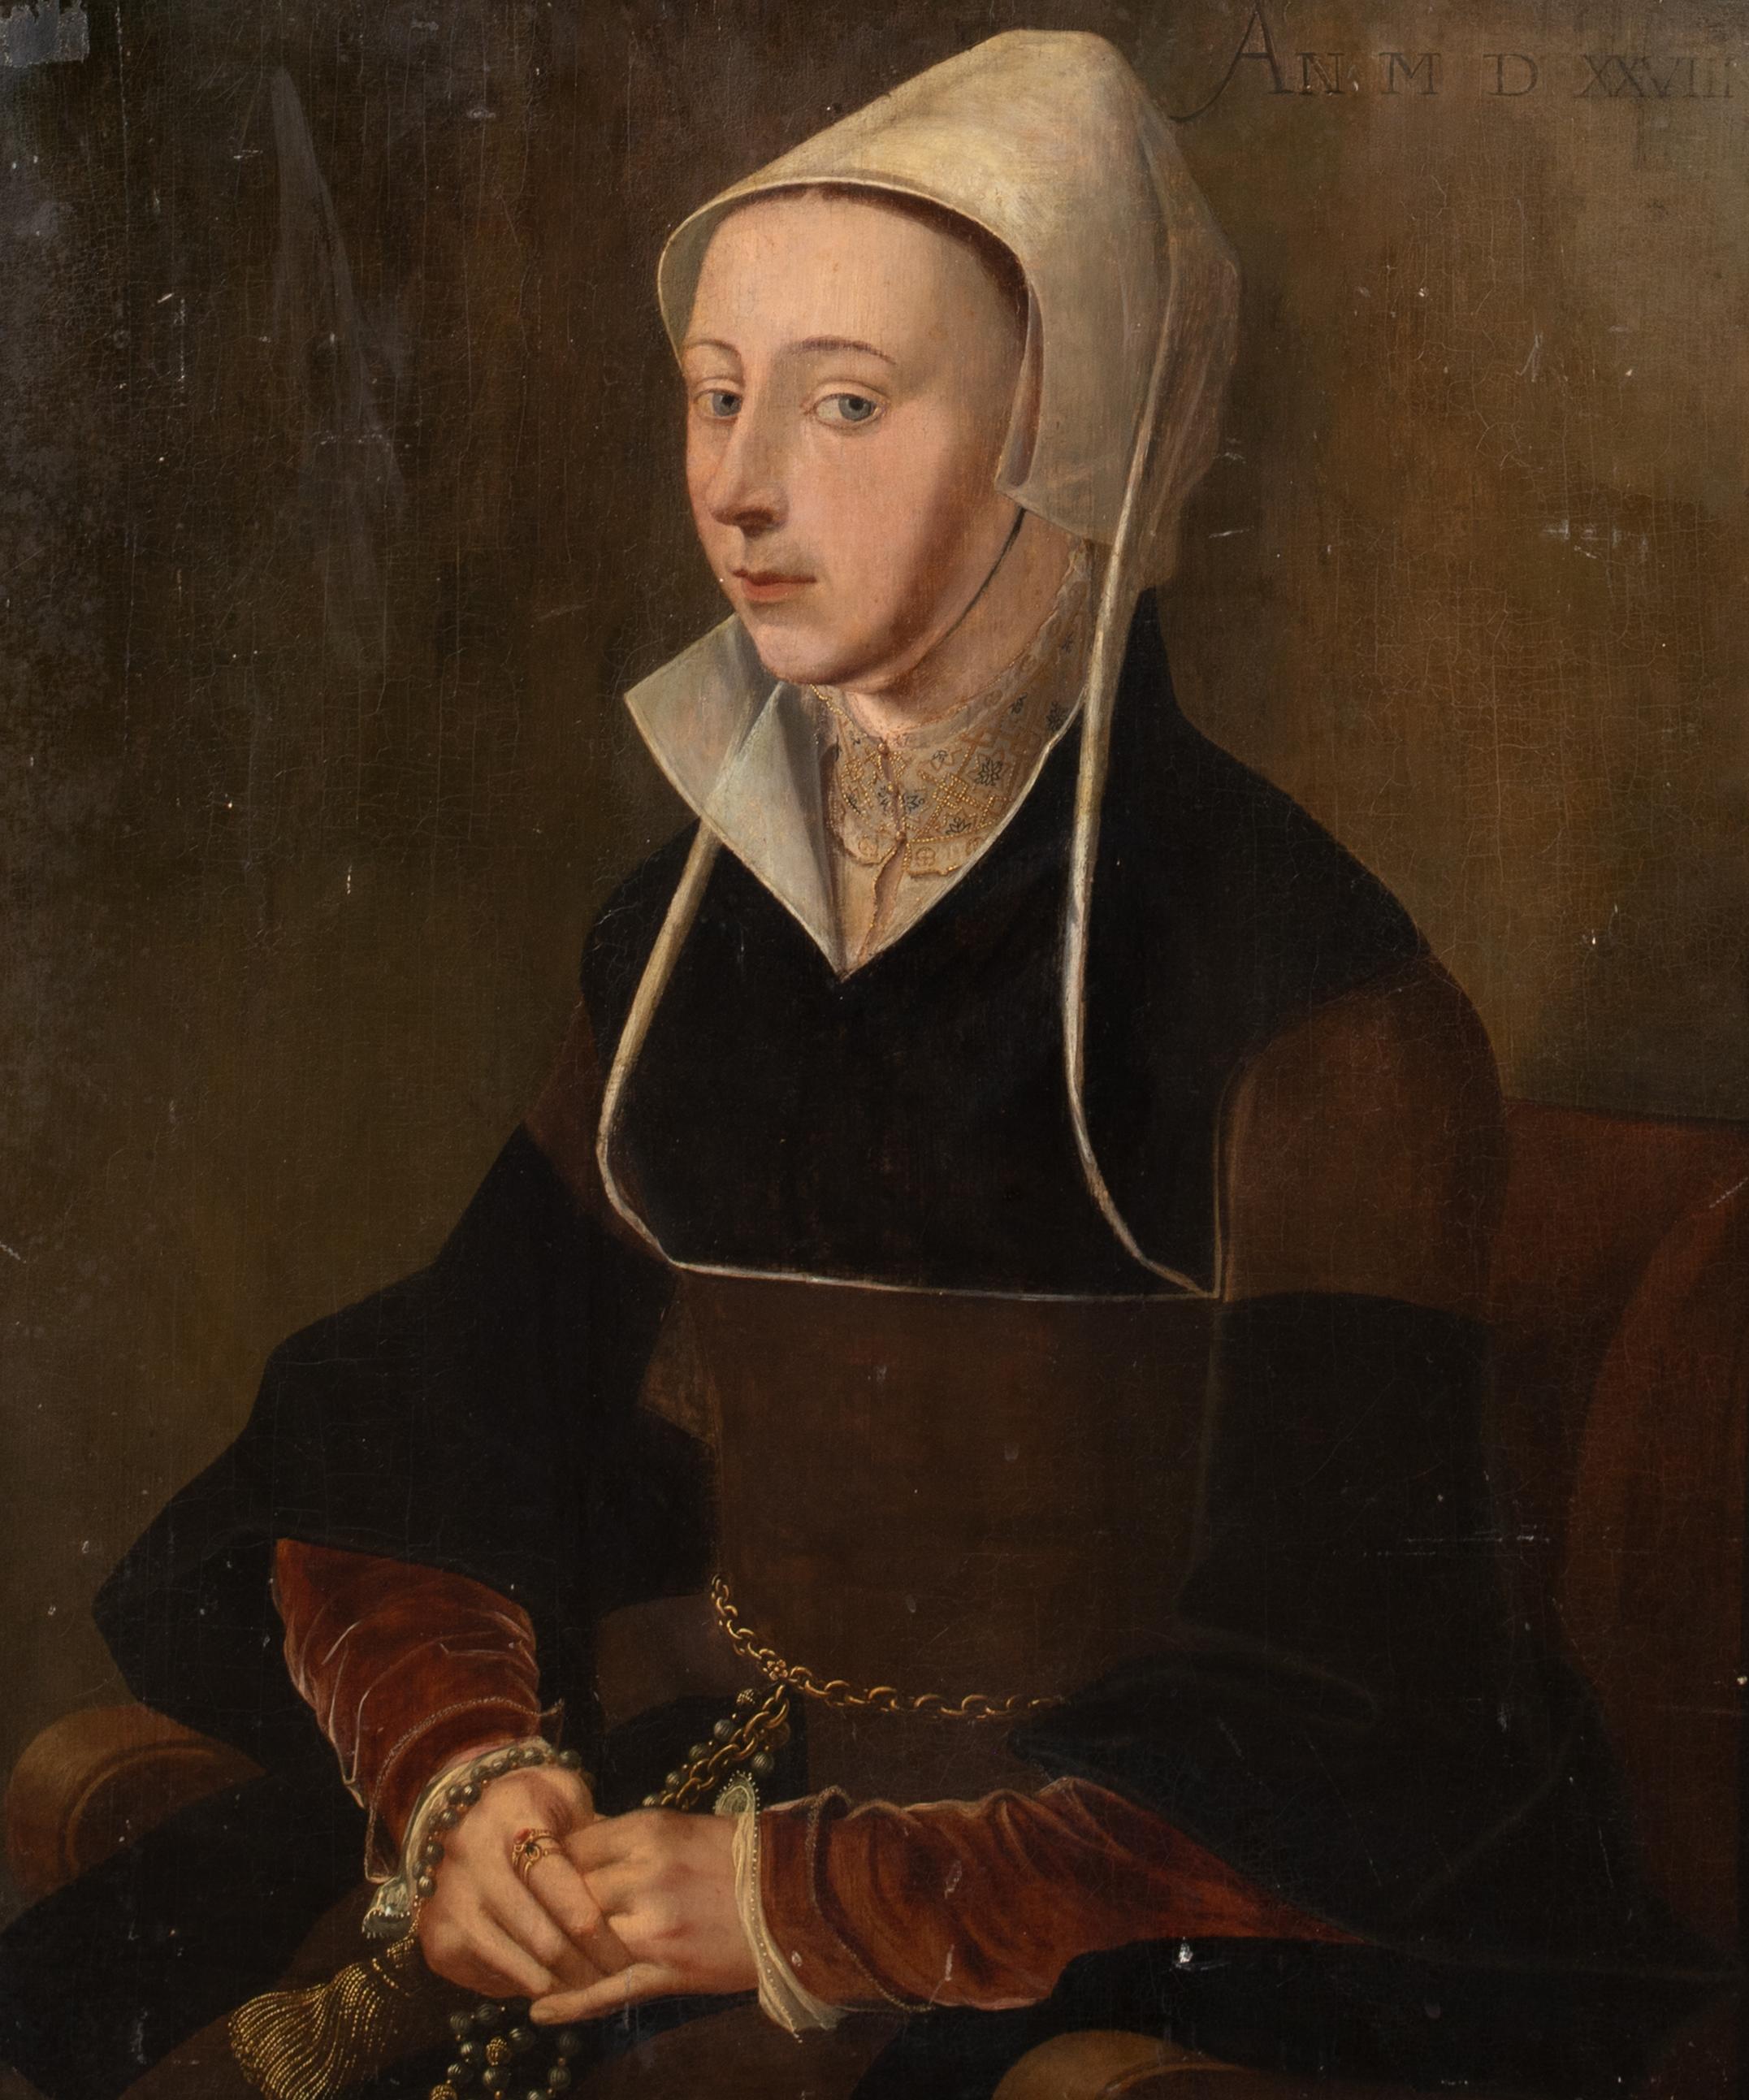 Portrait of a Woman Identified as Francisca Van Luxemburg, dated 1528

inscribed to JAN VAN SCOREL (1495-1565)

Large 16th Century portrait of a woman, Francisca Van Luxemburg, oil on panel inscribed to Jan Van Scorel. Excellent quality and